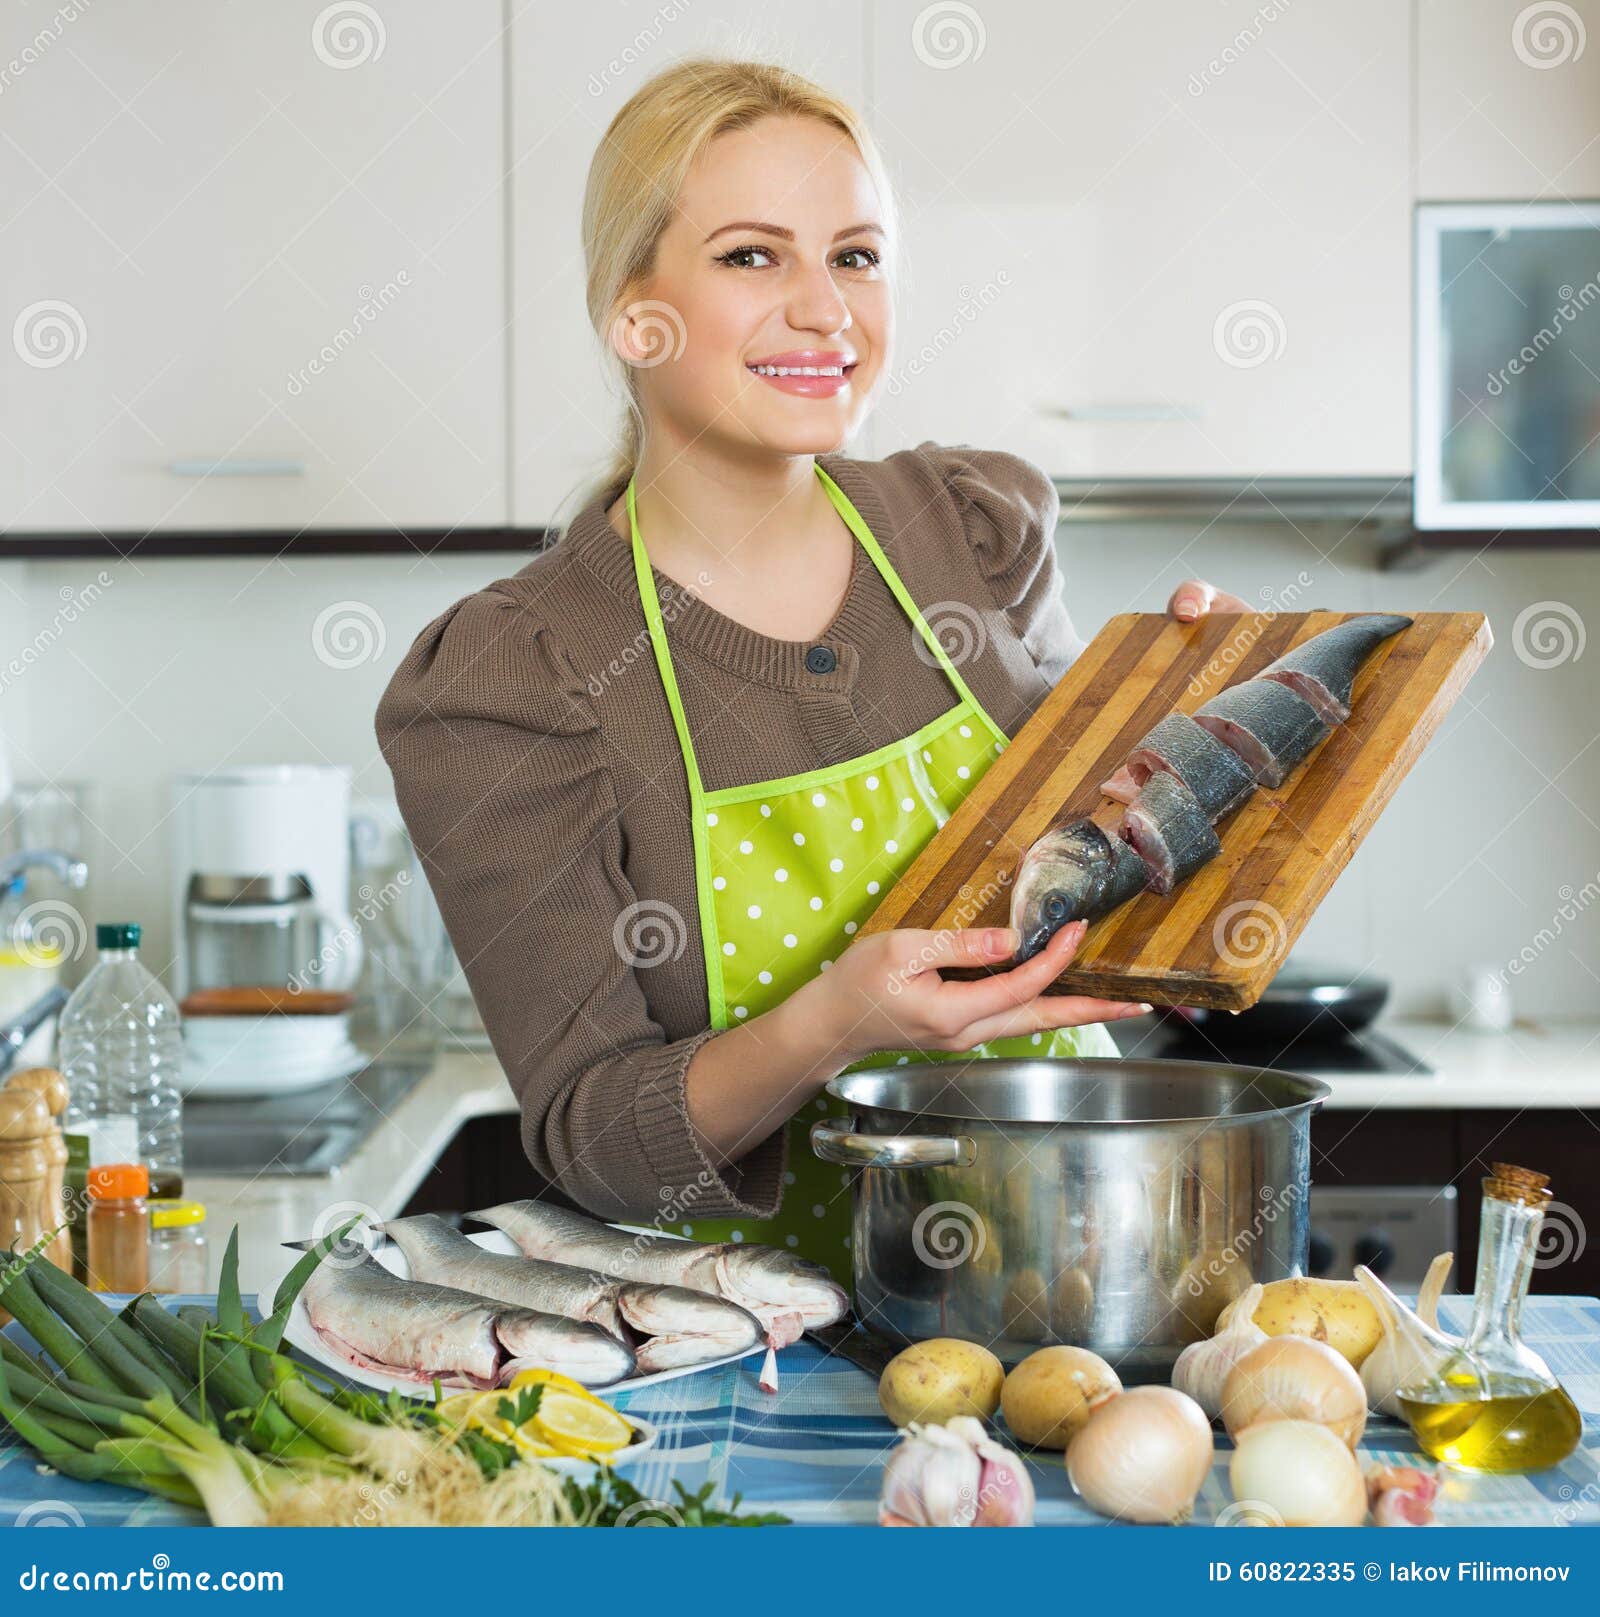 Housewife Cooking Soup With Fish Stock Image Im